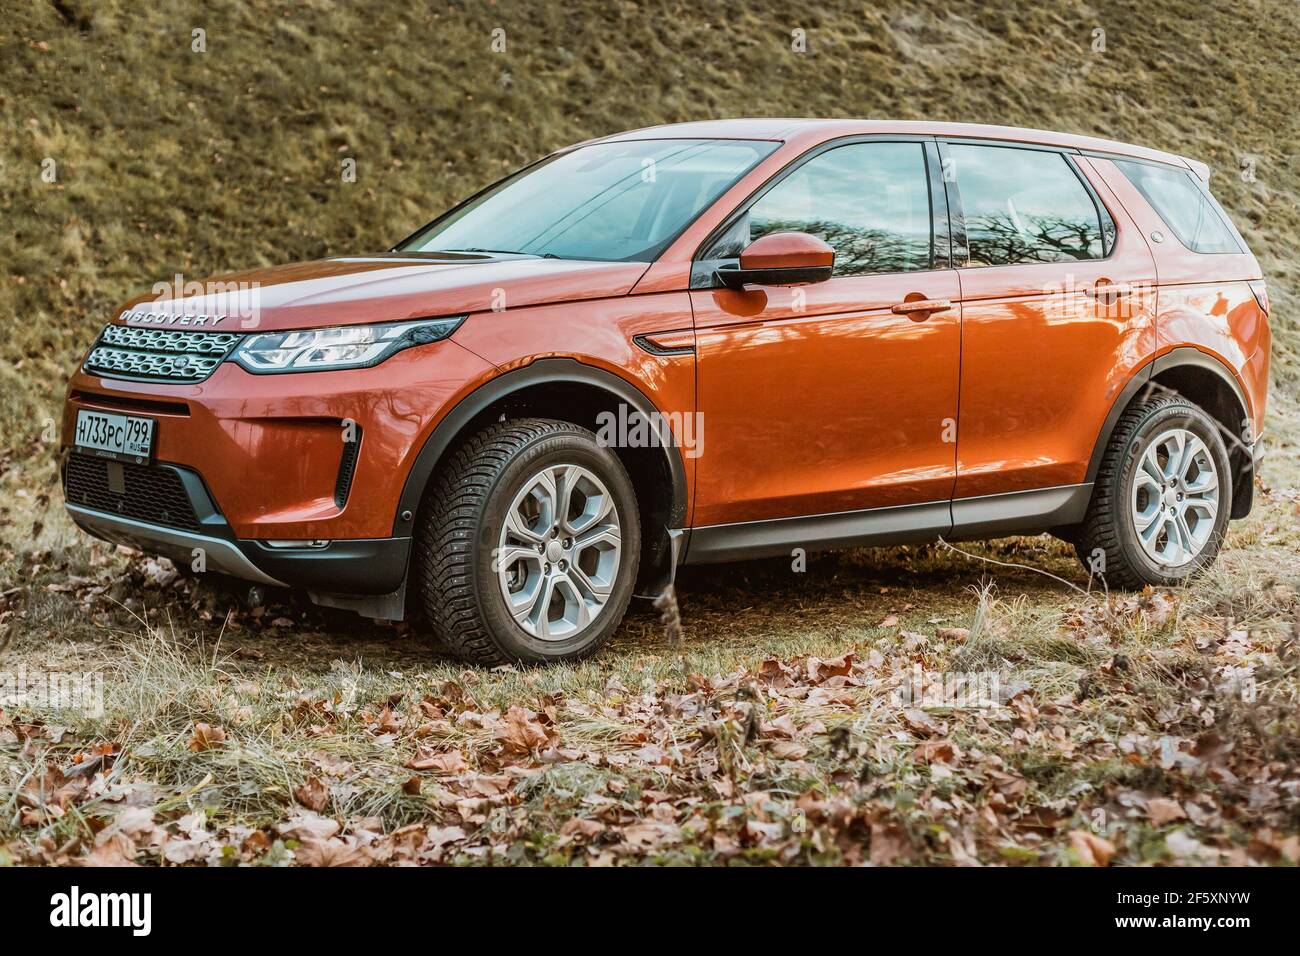 Moscow, Russia - December 20, 2019: side View of all new premium england suv. Land rover Discovery sport parked in the forest. Orange all wheel drive car standed on the ground. Stock Photo